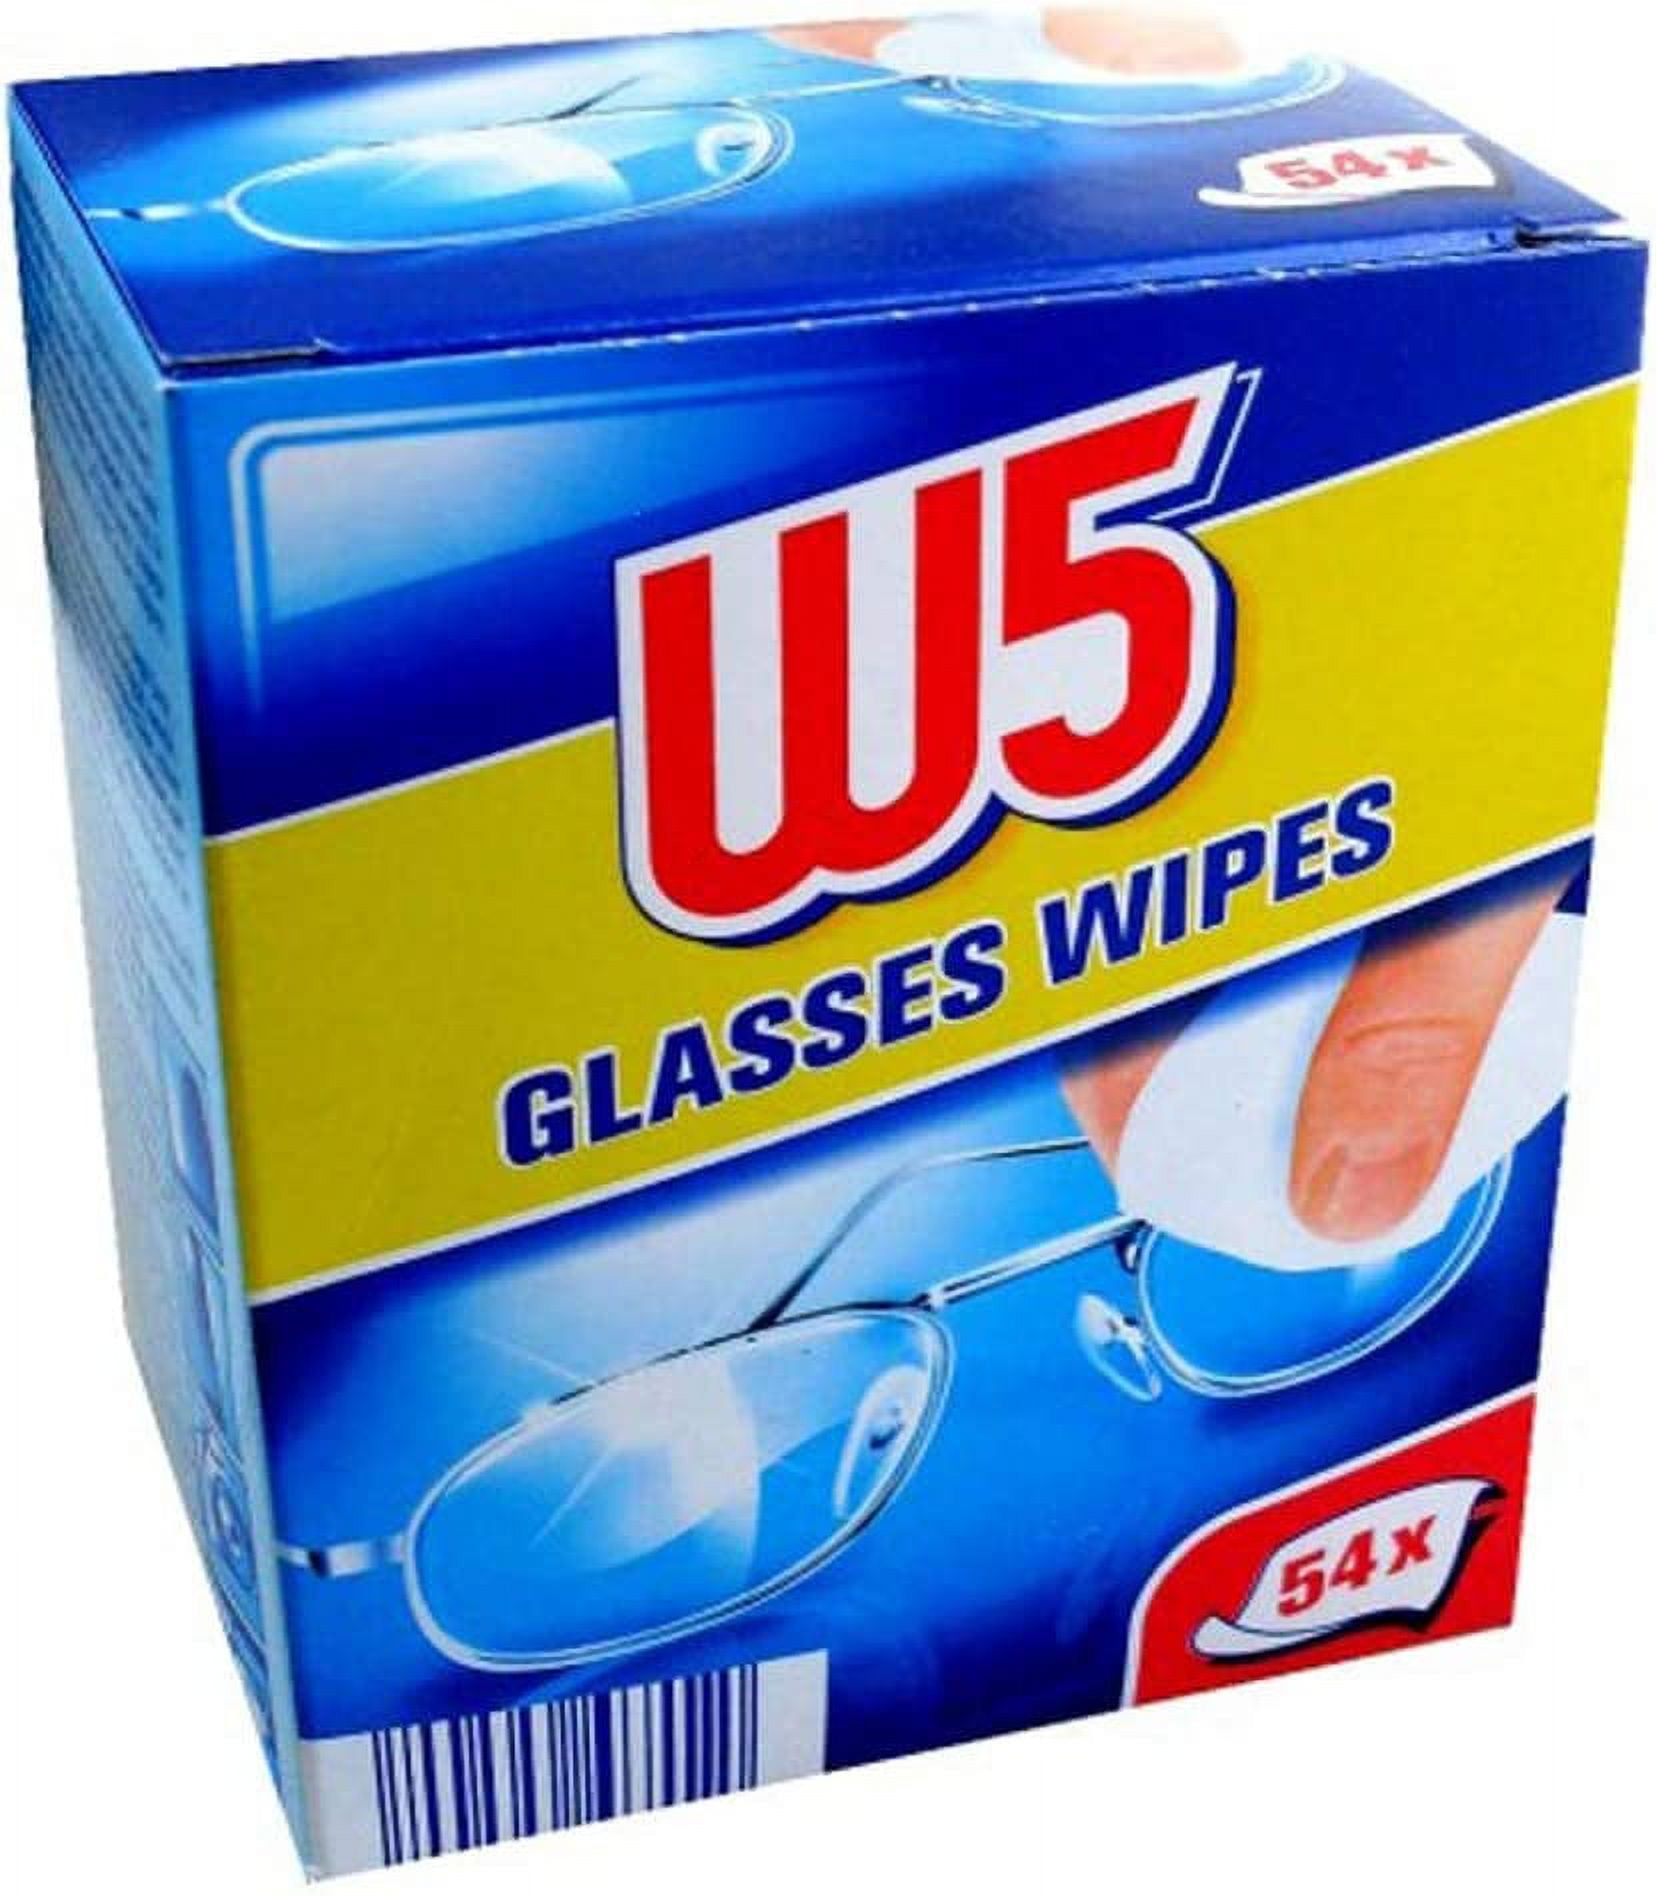 lens wipes for Glasses, Electronic, Mirrors, Cameras.